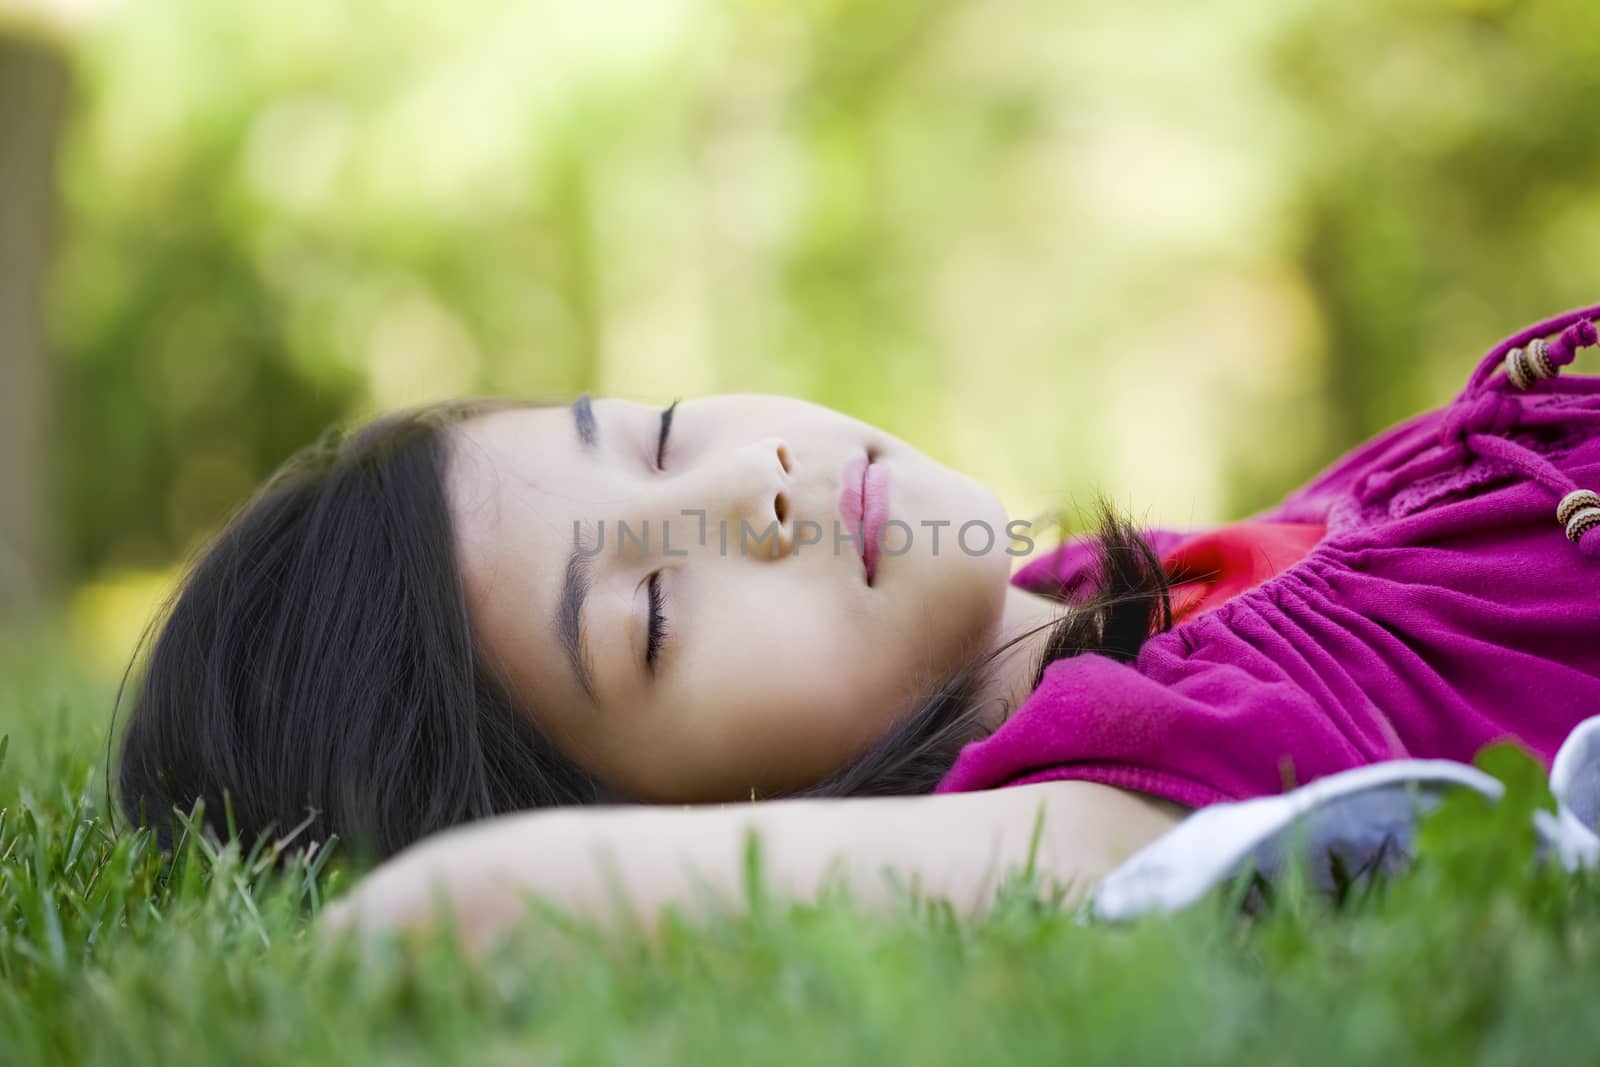 Little girl lying on grass lawn sleeping, close up view.